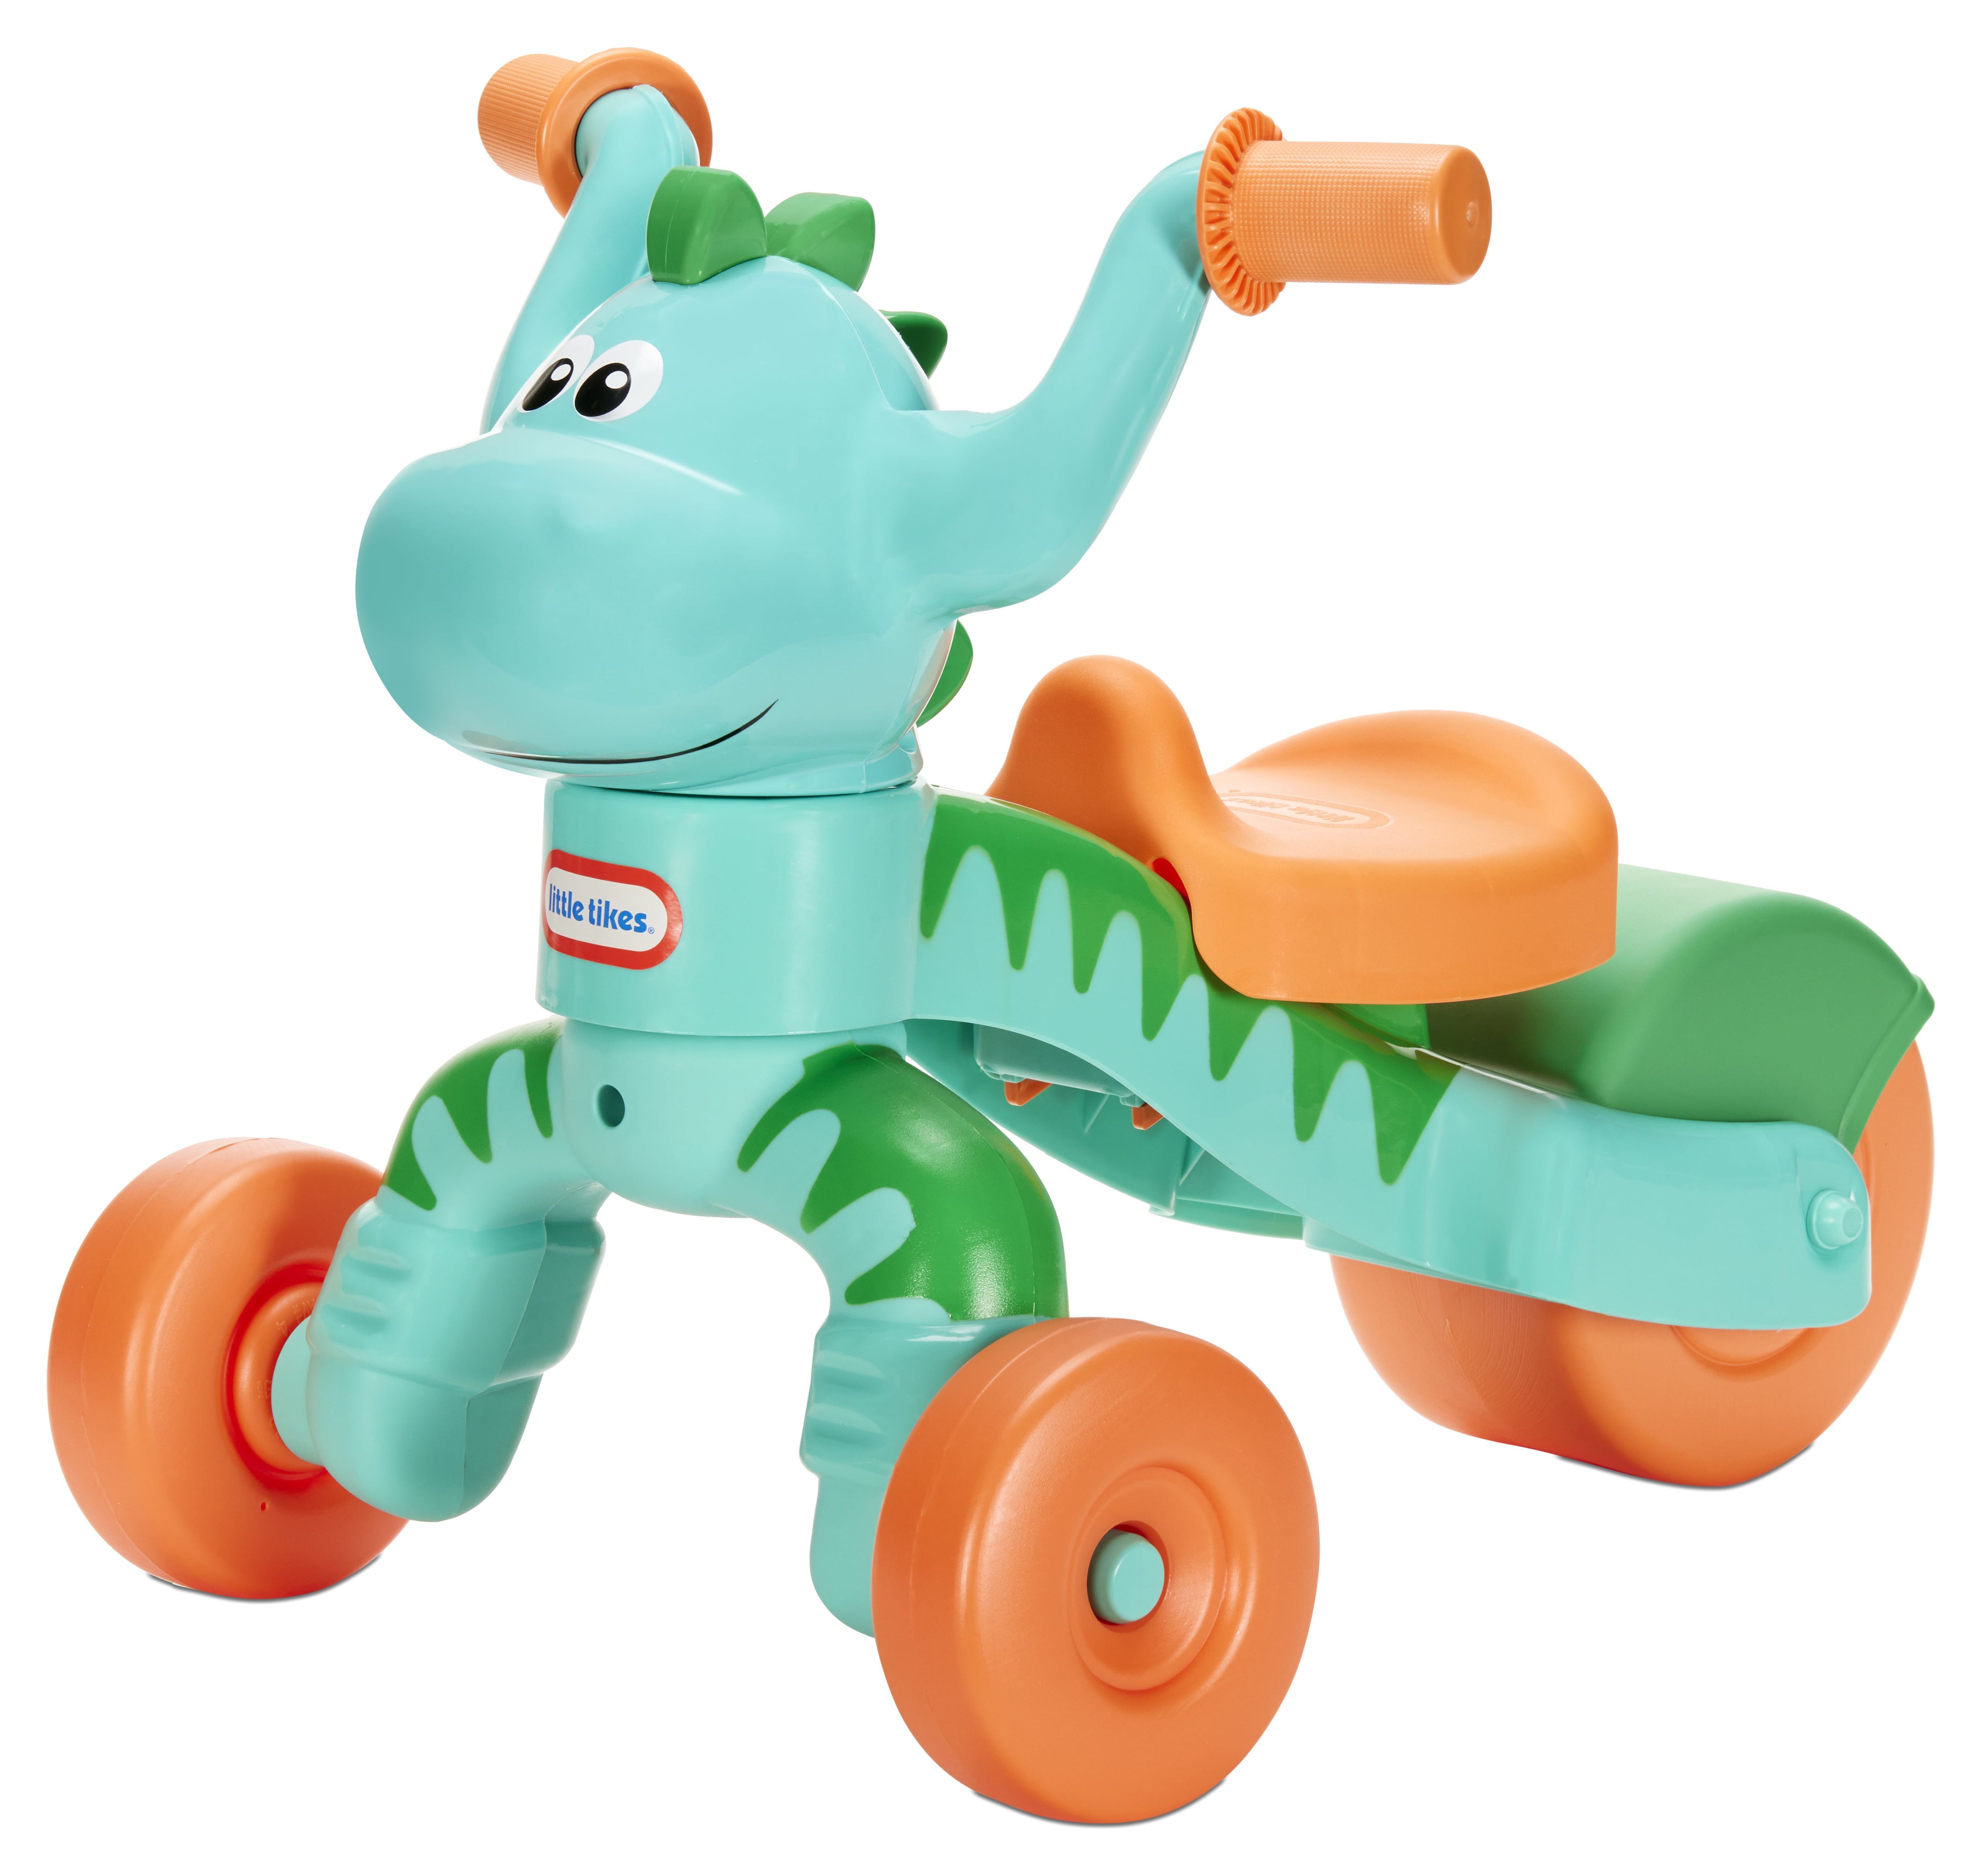 Little Tikes Go & Grow Dino Foot to Floor Dinosaur Tricycle for Toddlers Ride-on Toy, Kids Boys Girls Ages 12 Months to 3 Years - image 3 of 7